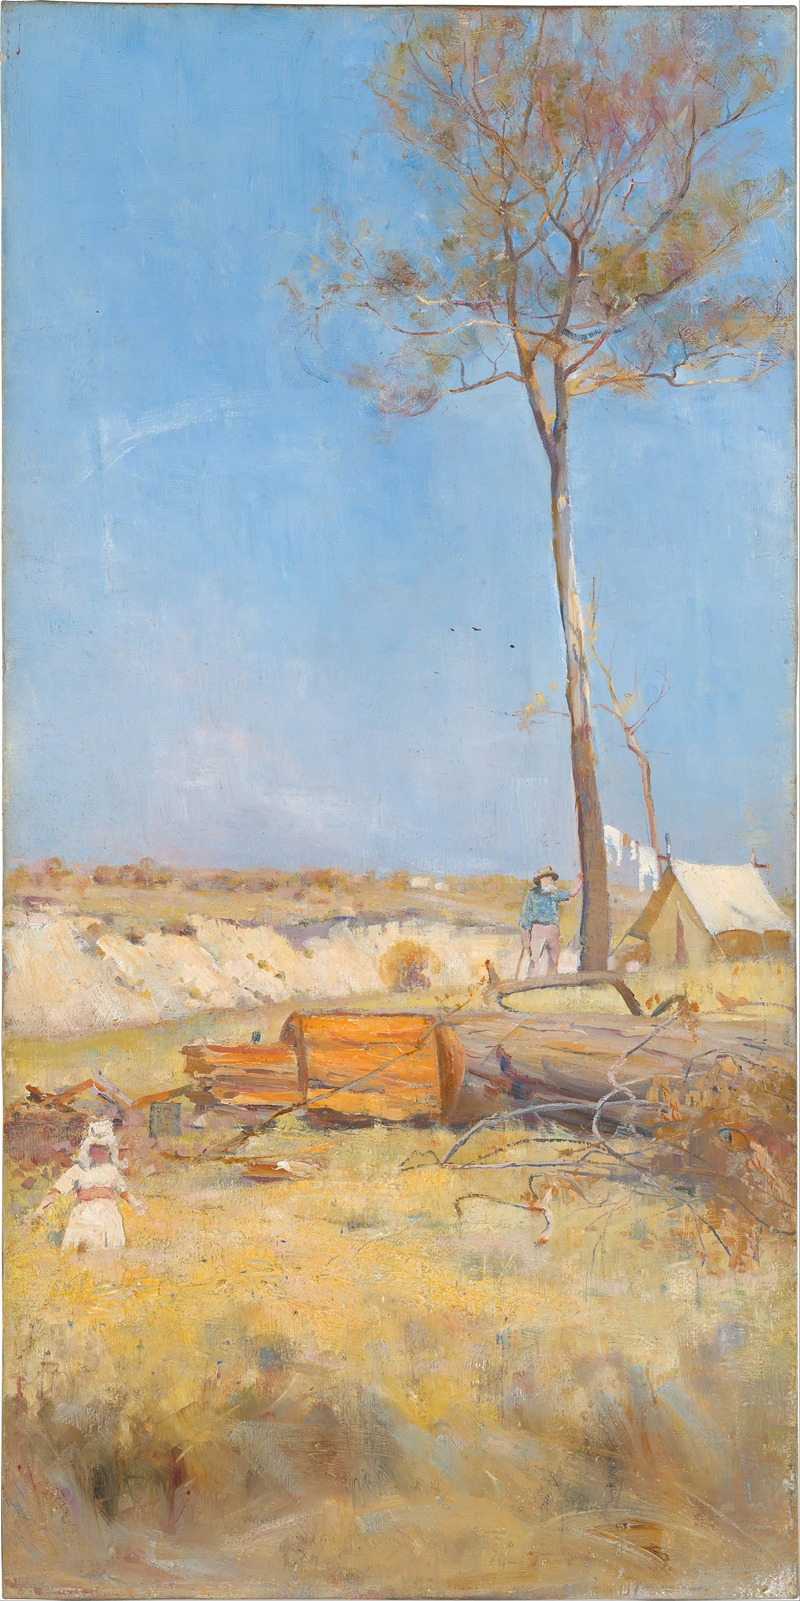 Charles Conder - Under a southern sun (Timber splitter’s camp)